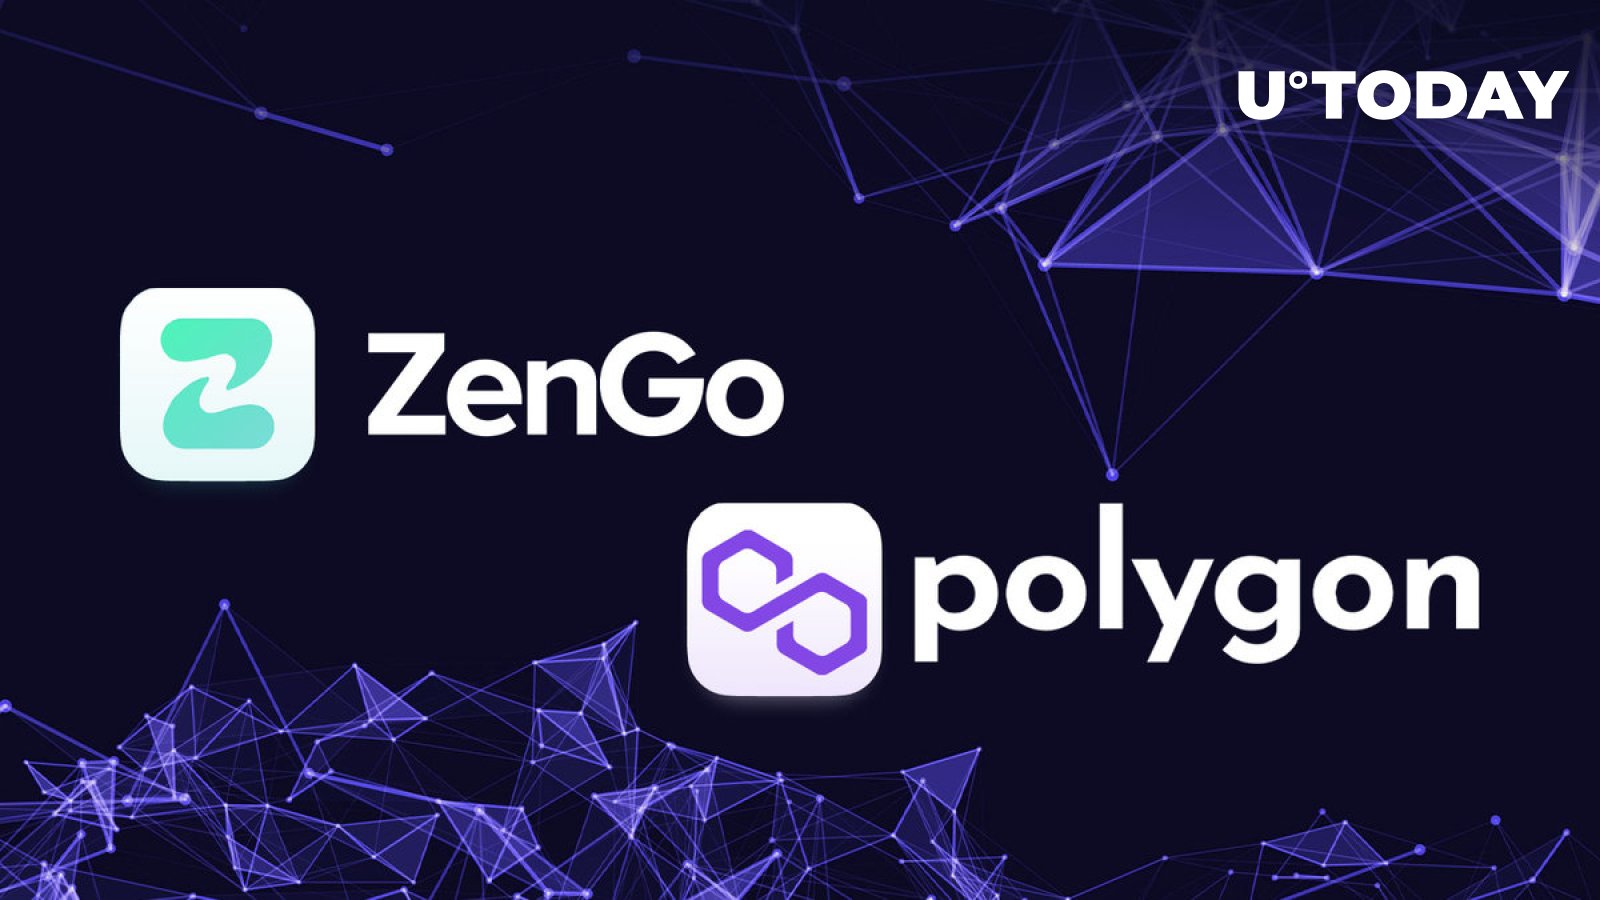 ZenGo Introduces First-Ever On-Chain Wallet for Polygon (MATIC) with No Seed Phrase Vulnerability